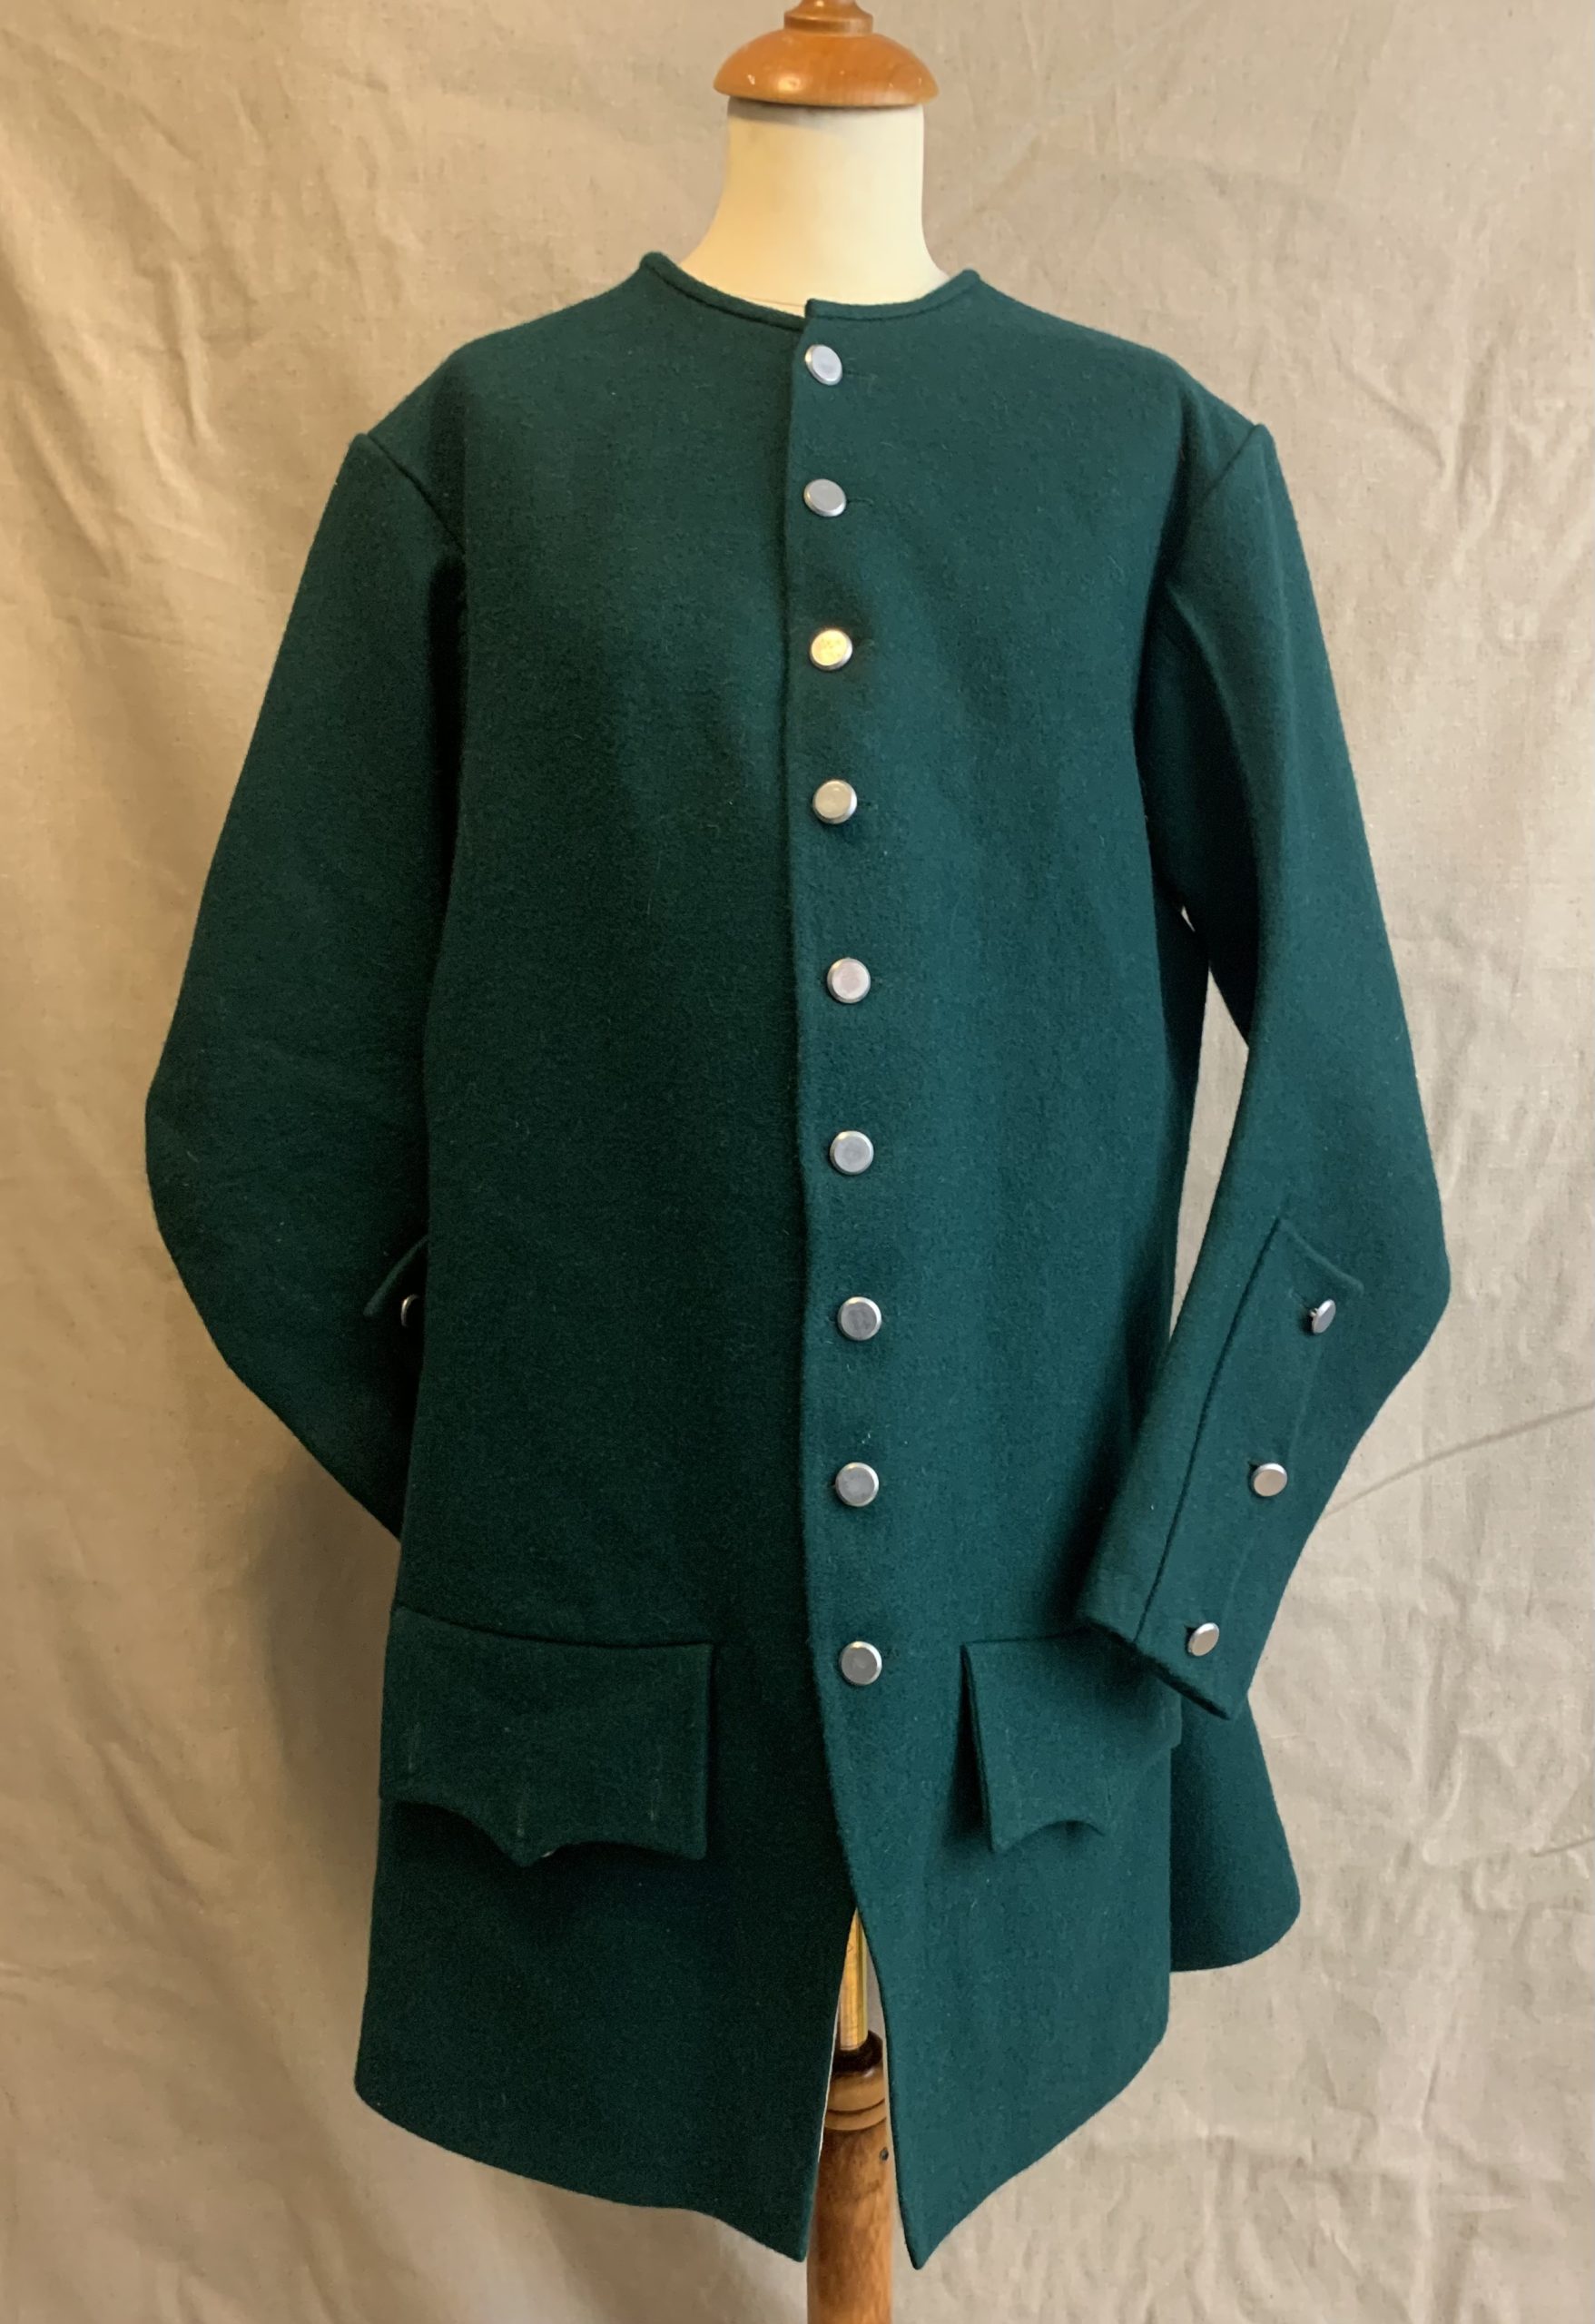 Scottish Army Jacket 18th Century - Tailor & Arms